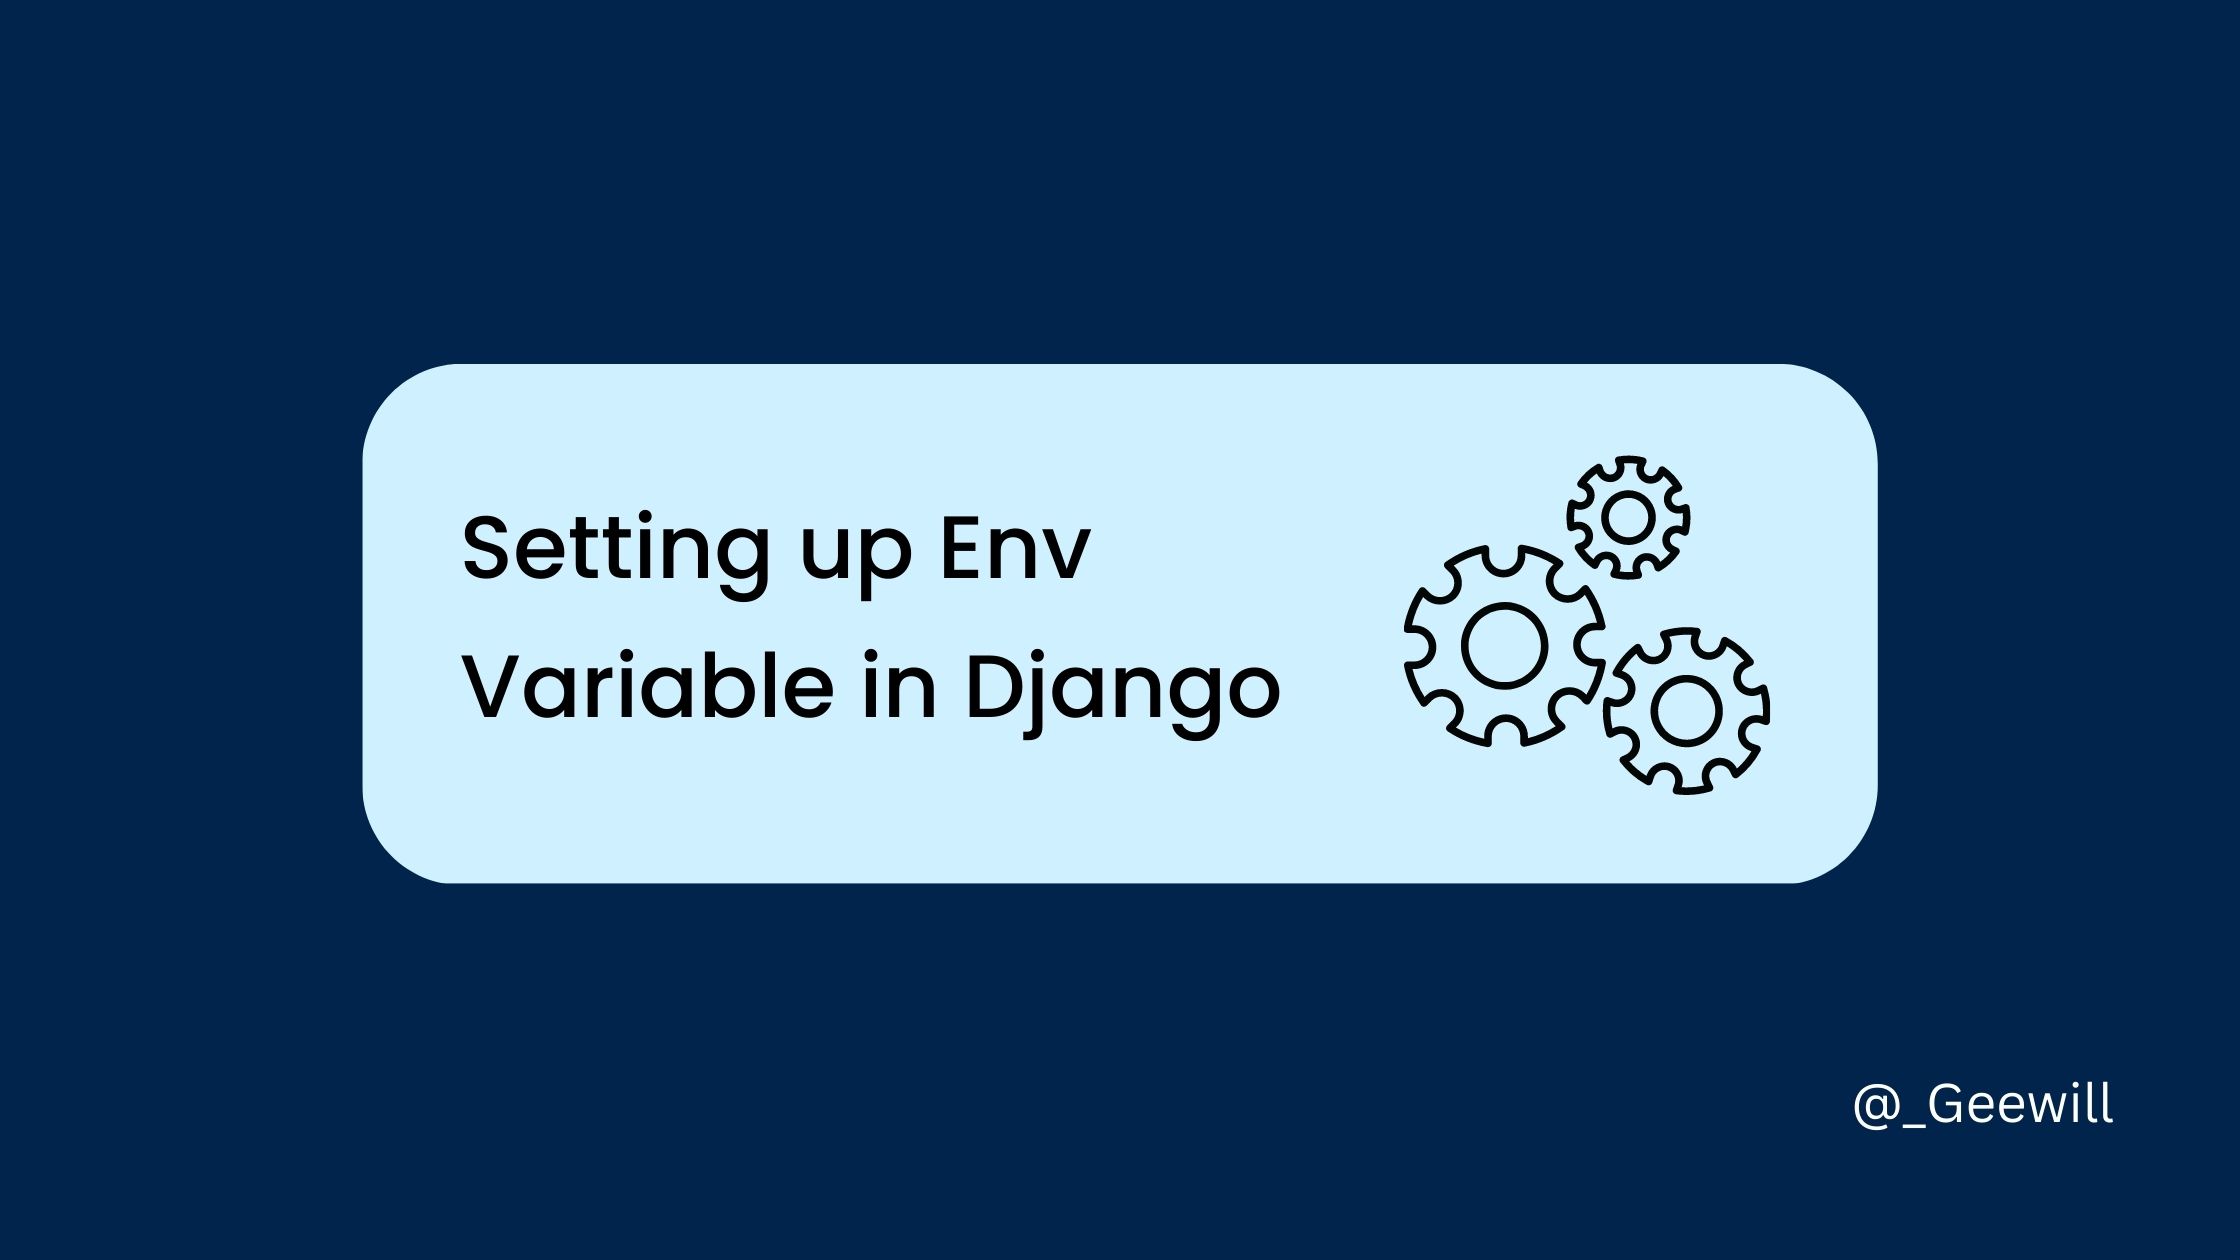 How to set up an env variable in django